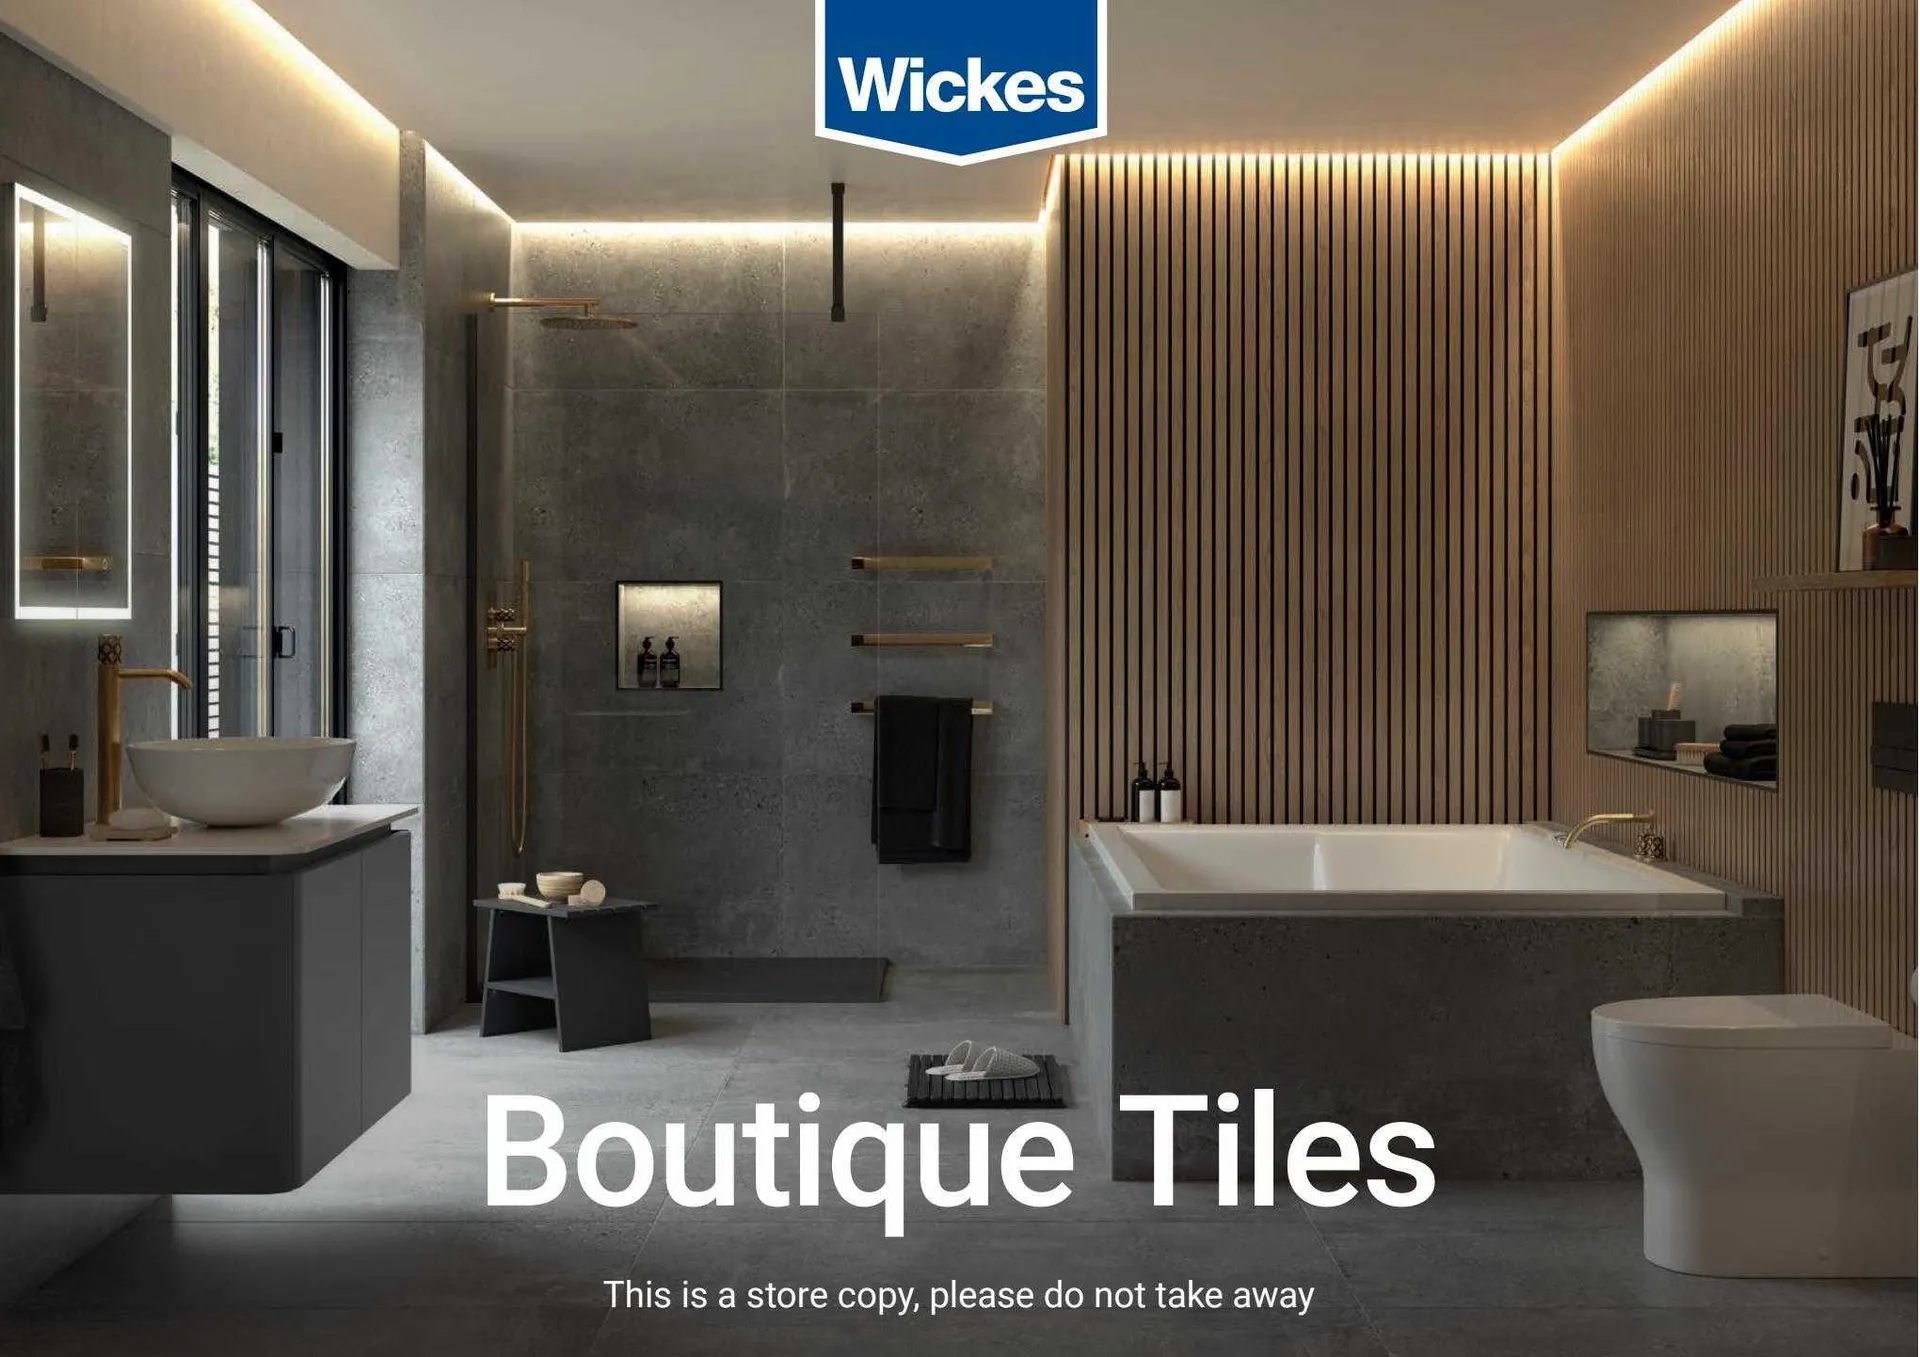 Wickes Weekly Offers - 1